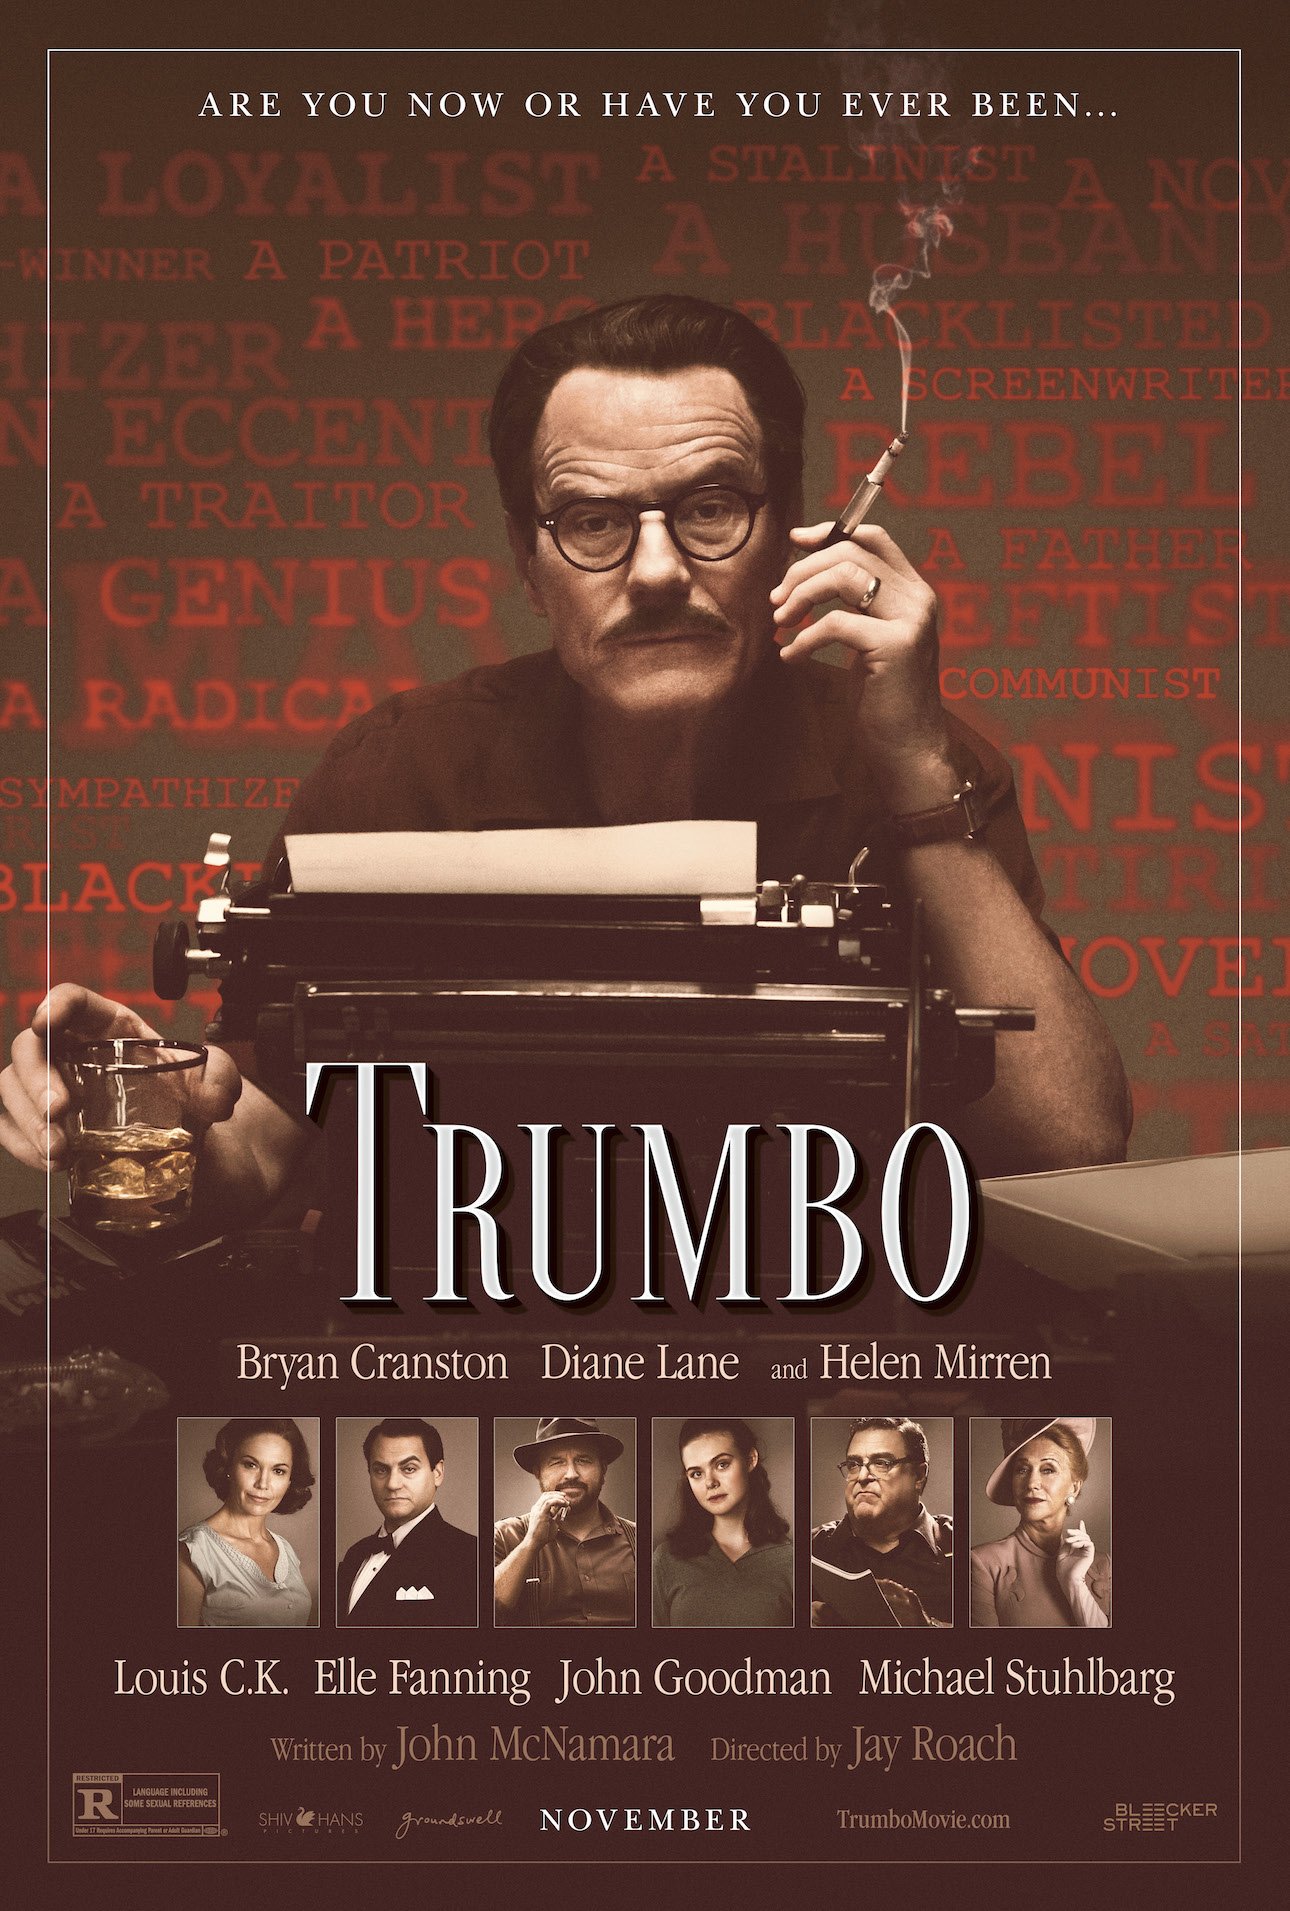 Trumbo is in cinemas on February 5th - HeadStuff.org